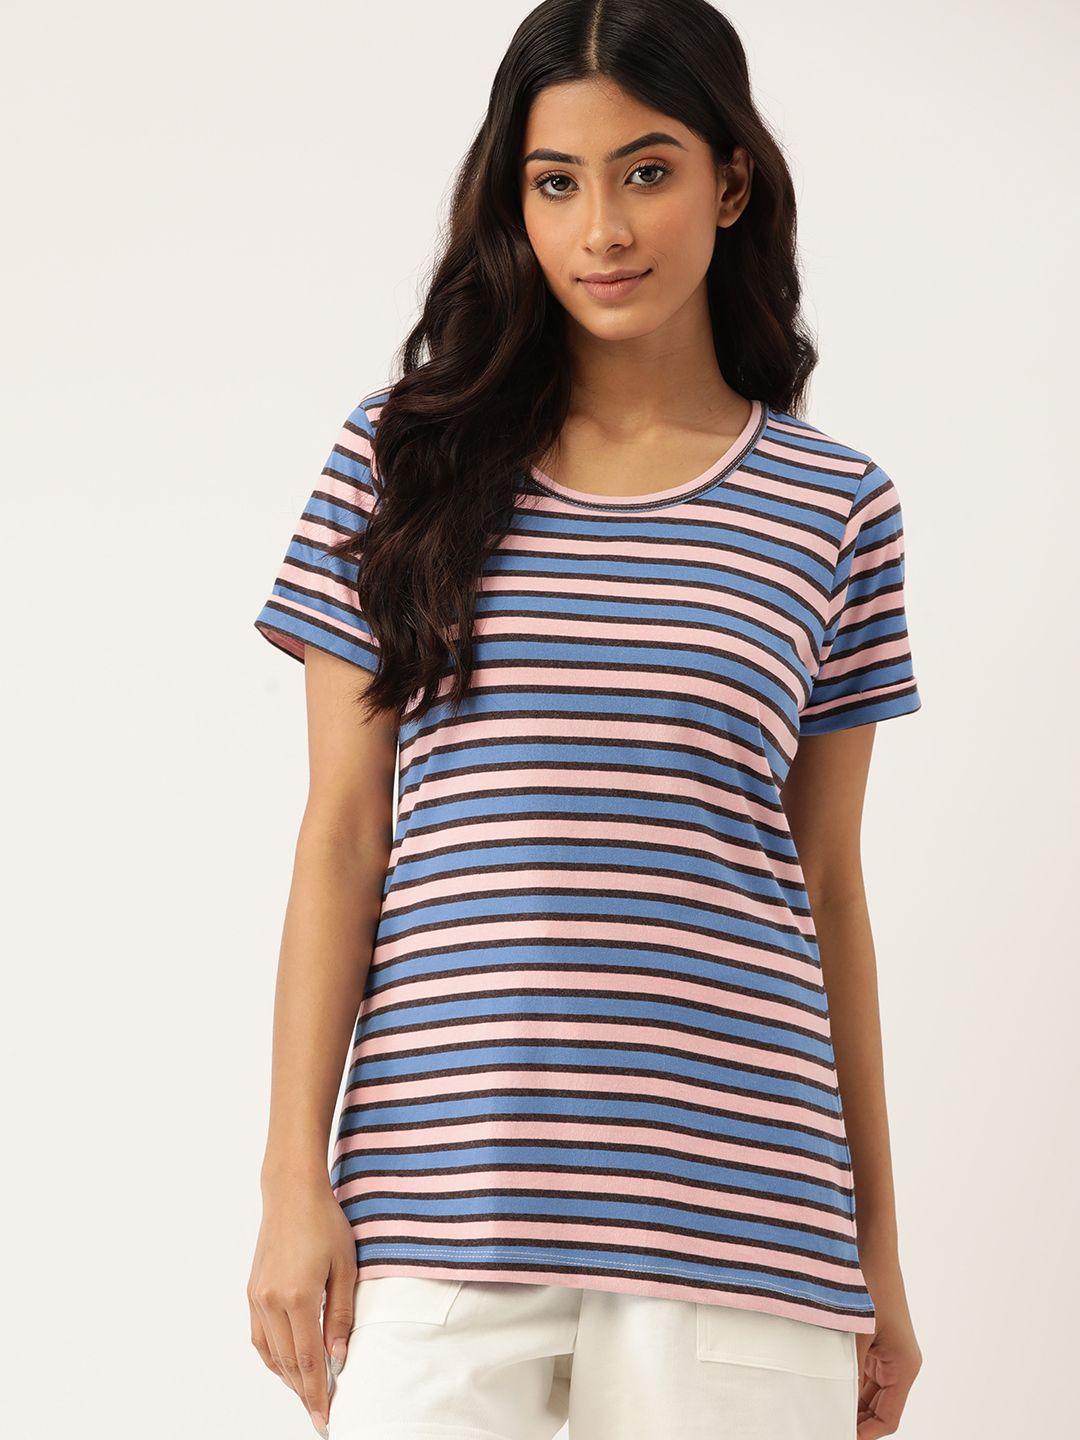 ETC Women Pink & Blue Striped Lounge T-shirt Price in India